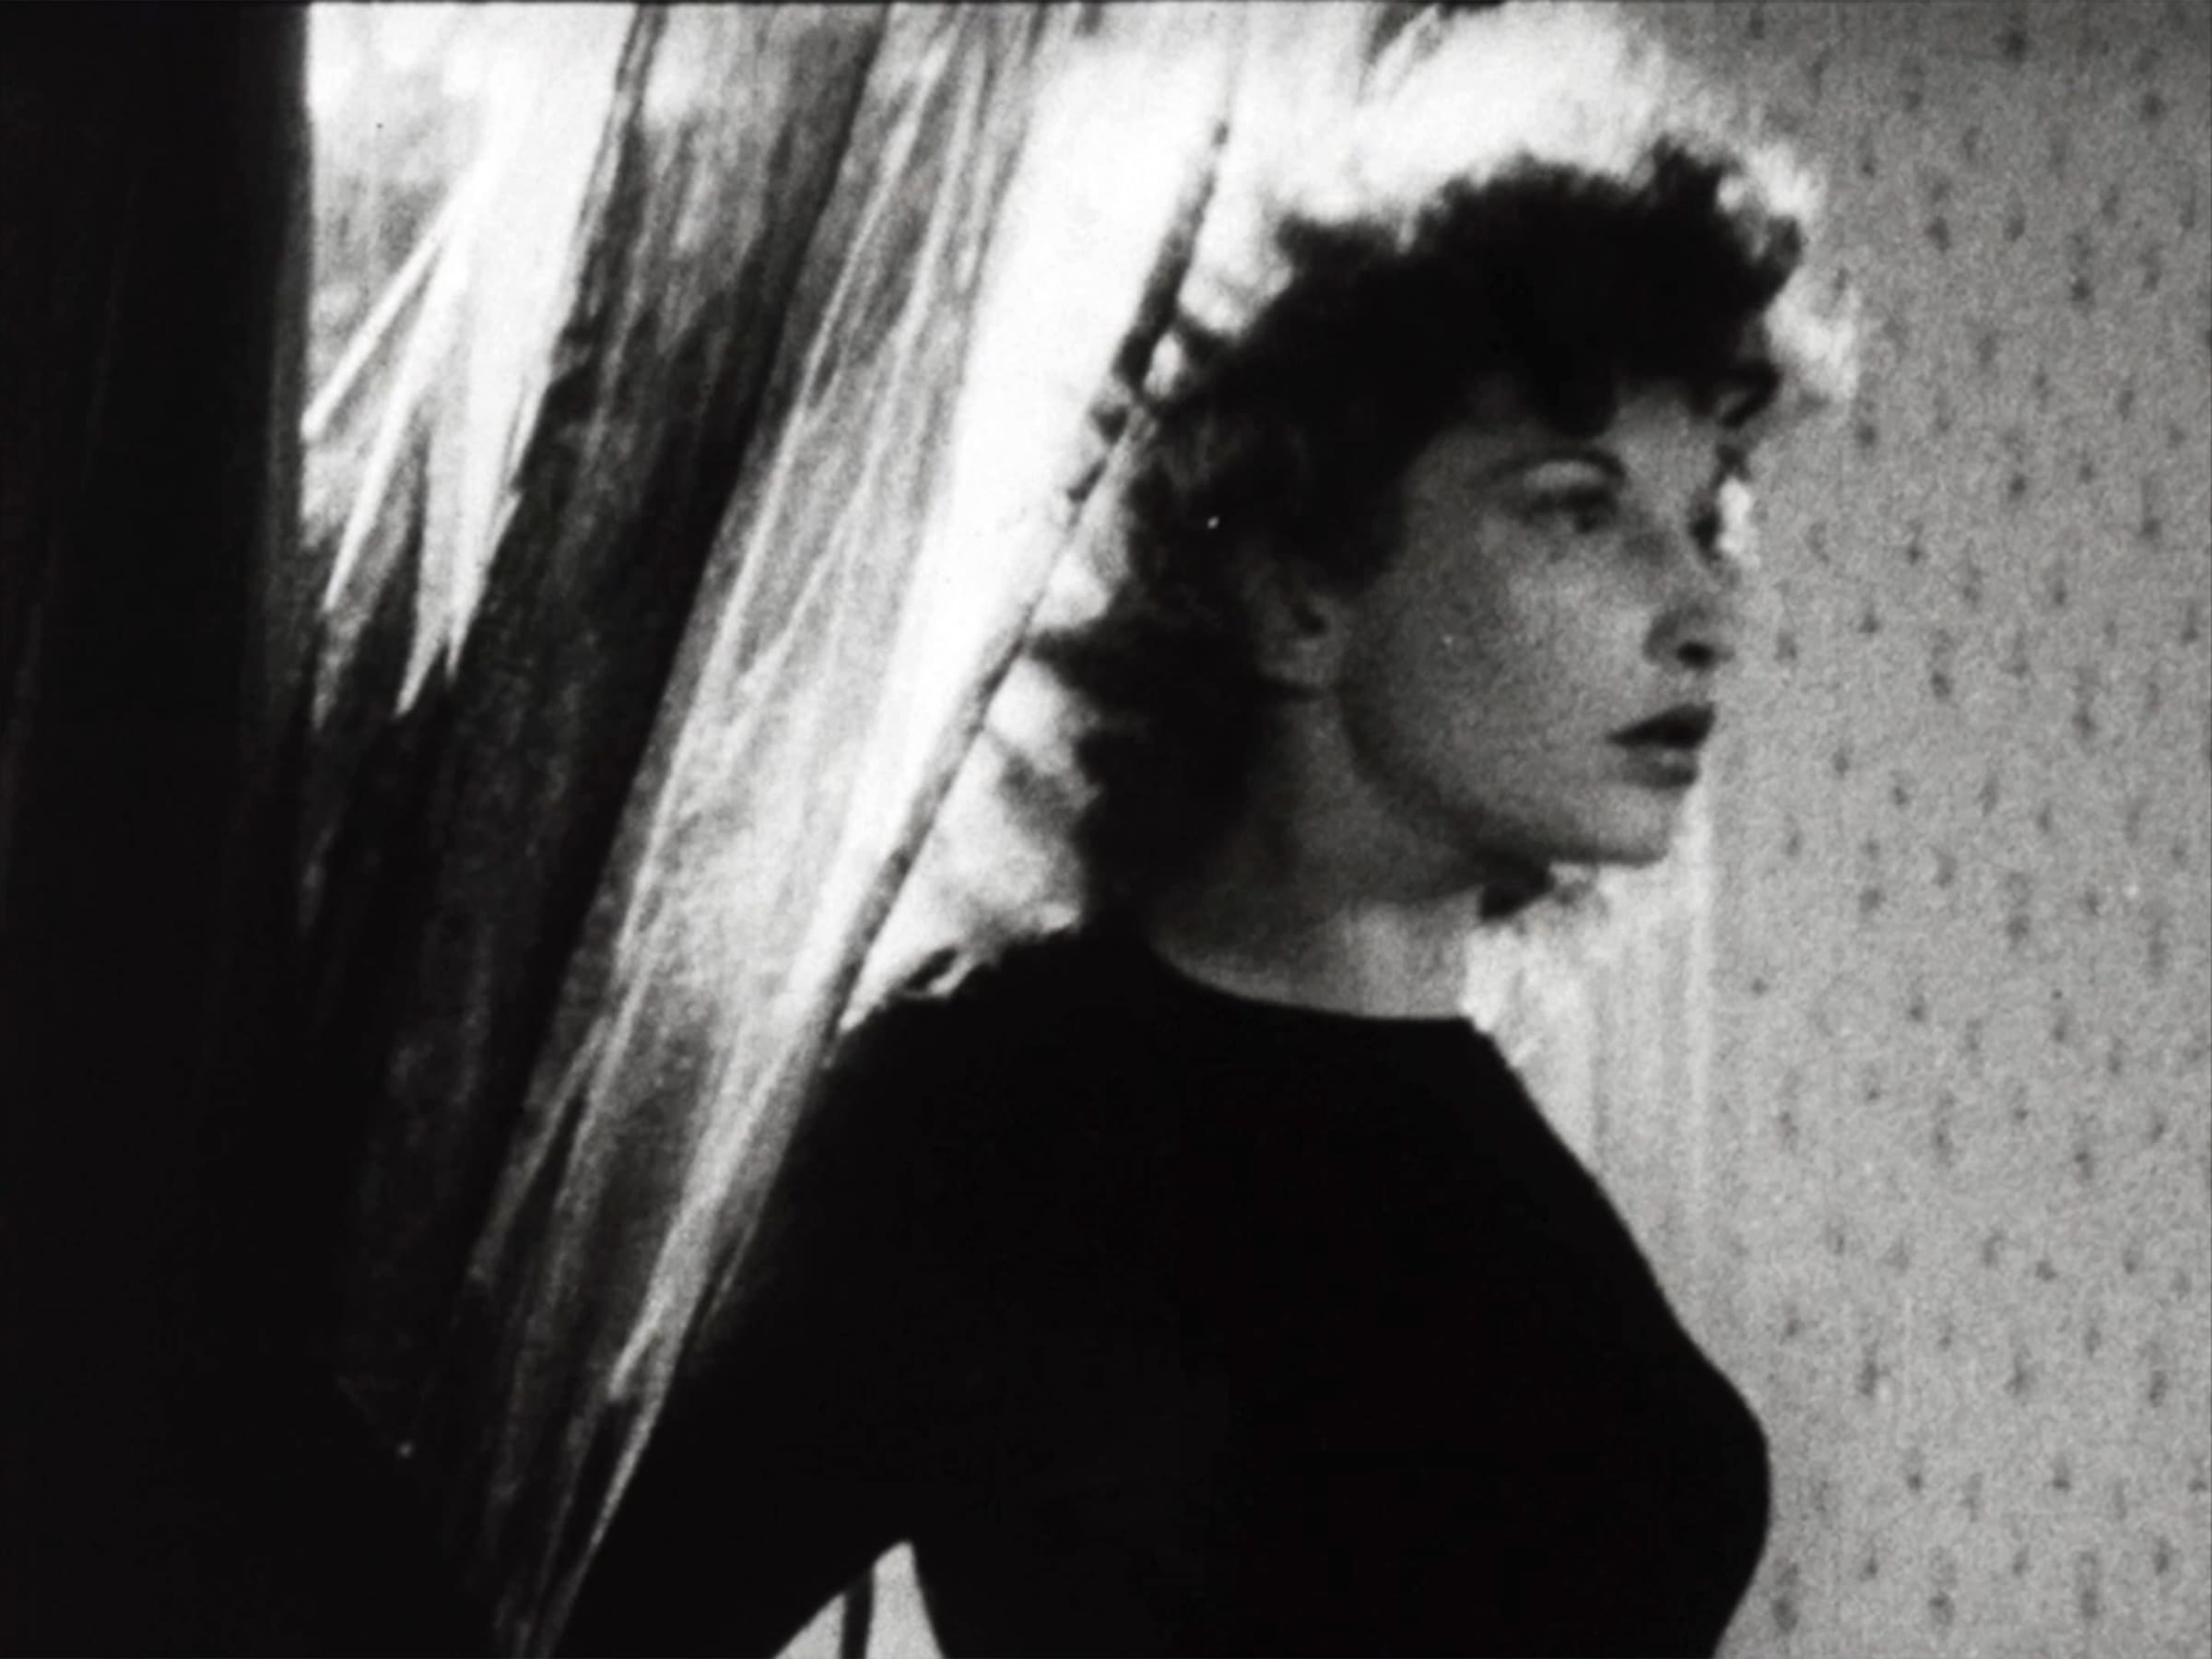 Woman standing in front of curtain from film noir